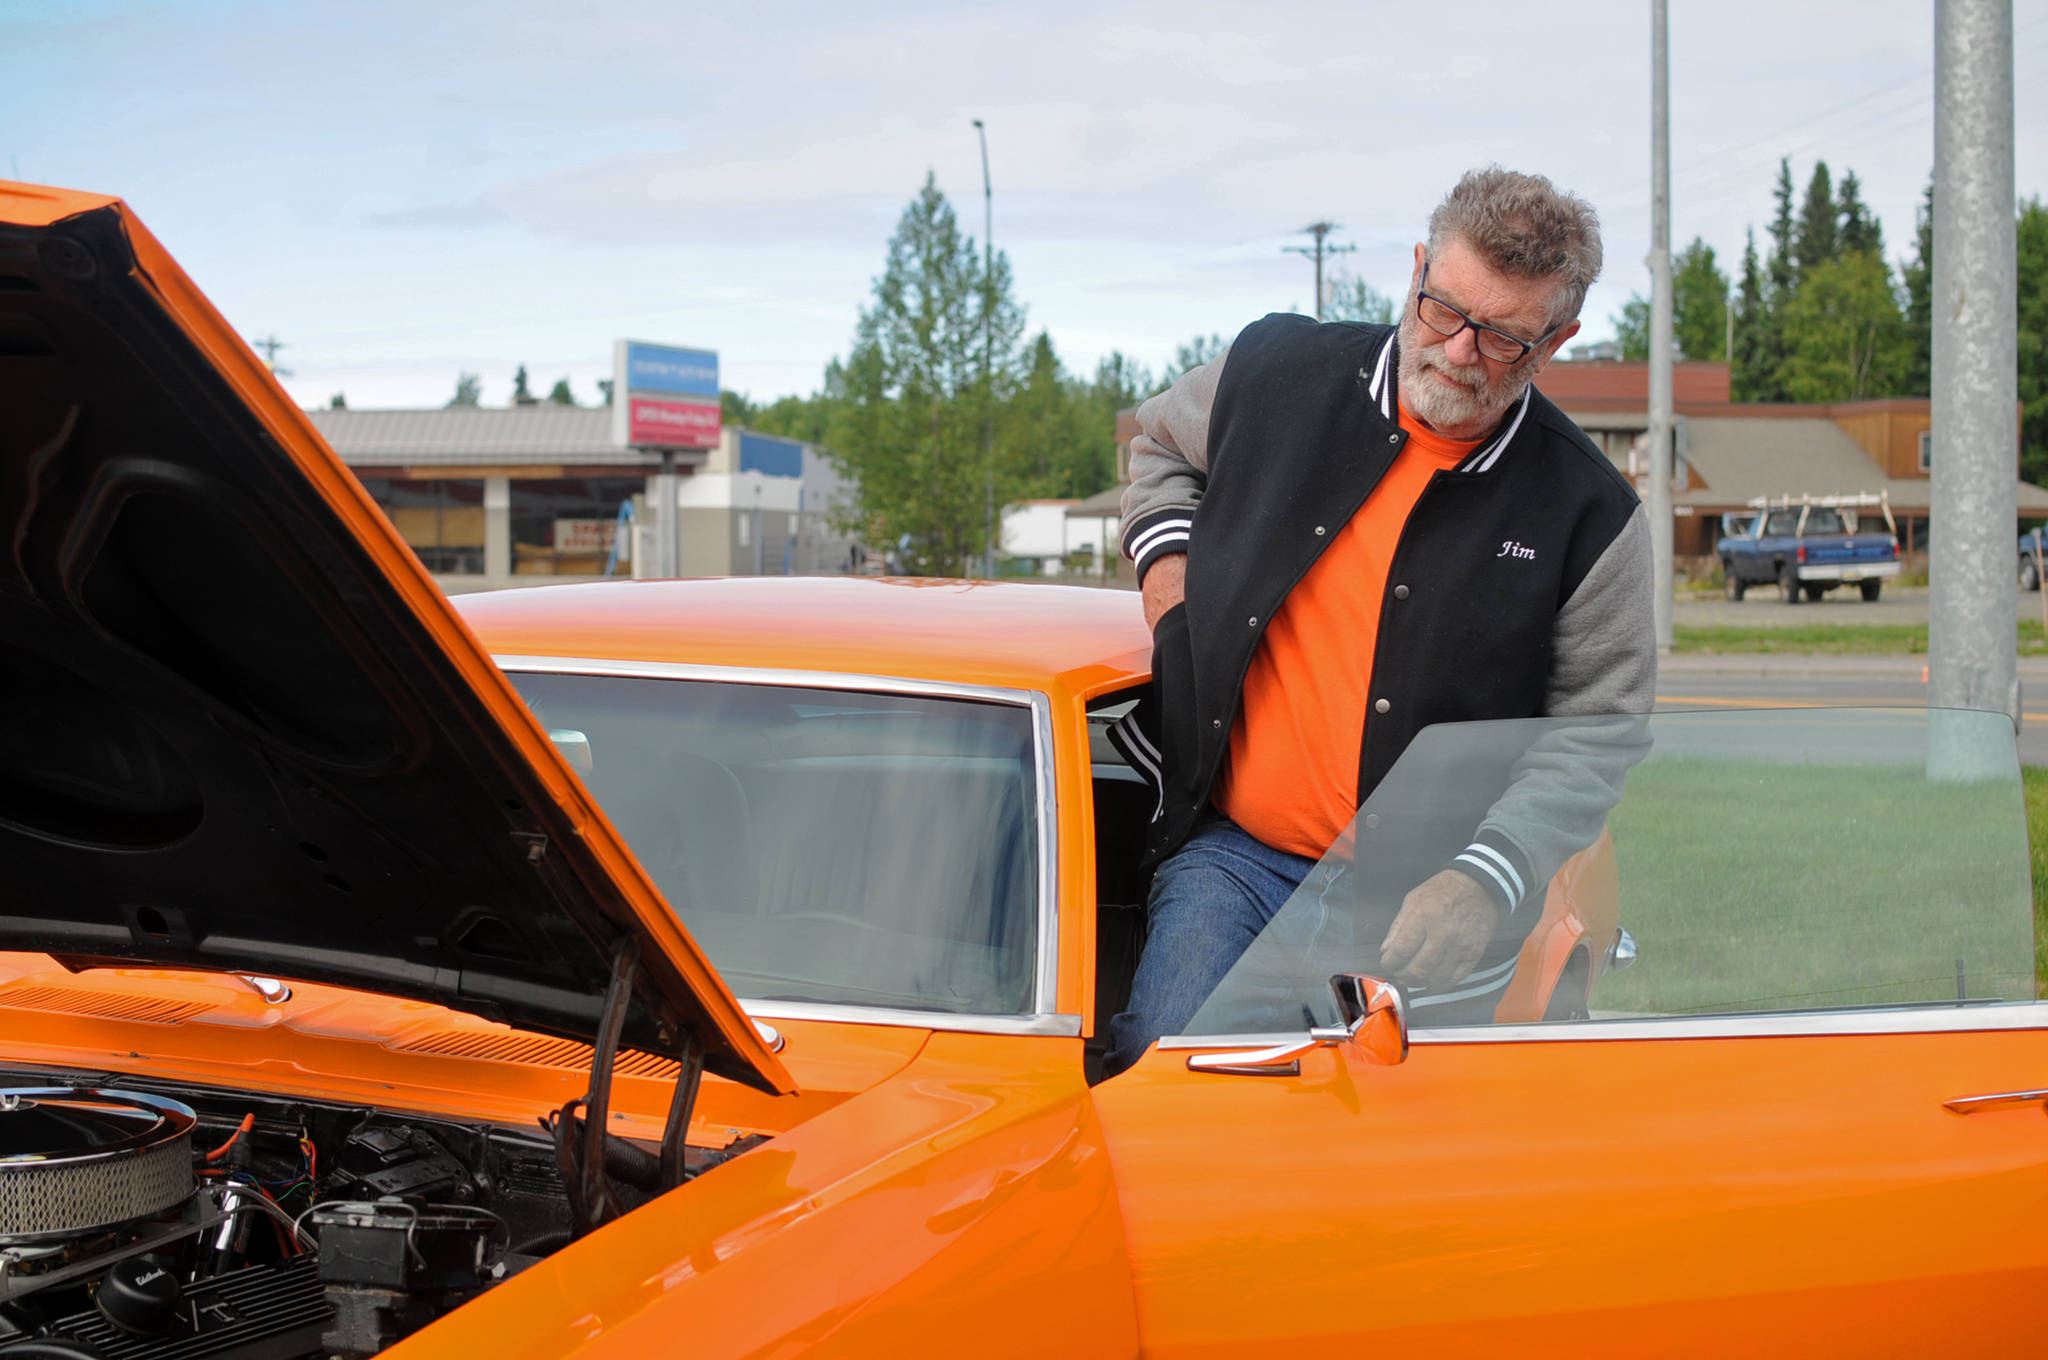 Jim McEwen steps into the classic car he restored at Autozone on Saturday, June 30, 2018 in Soldotna, Alaska. McEwen is a member of the Kaknu Kruzers, a local club composed of members who restore classic cars. The club has a number of events and rives throughou the summe, including the upoming car show at the Soldotna Progress Days parade on July 28. (Photo by Elizabeth Earl/Peninsula Clarion)